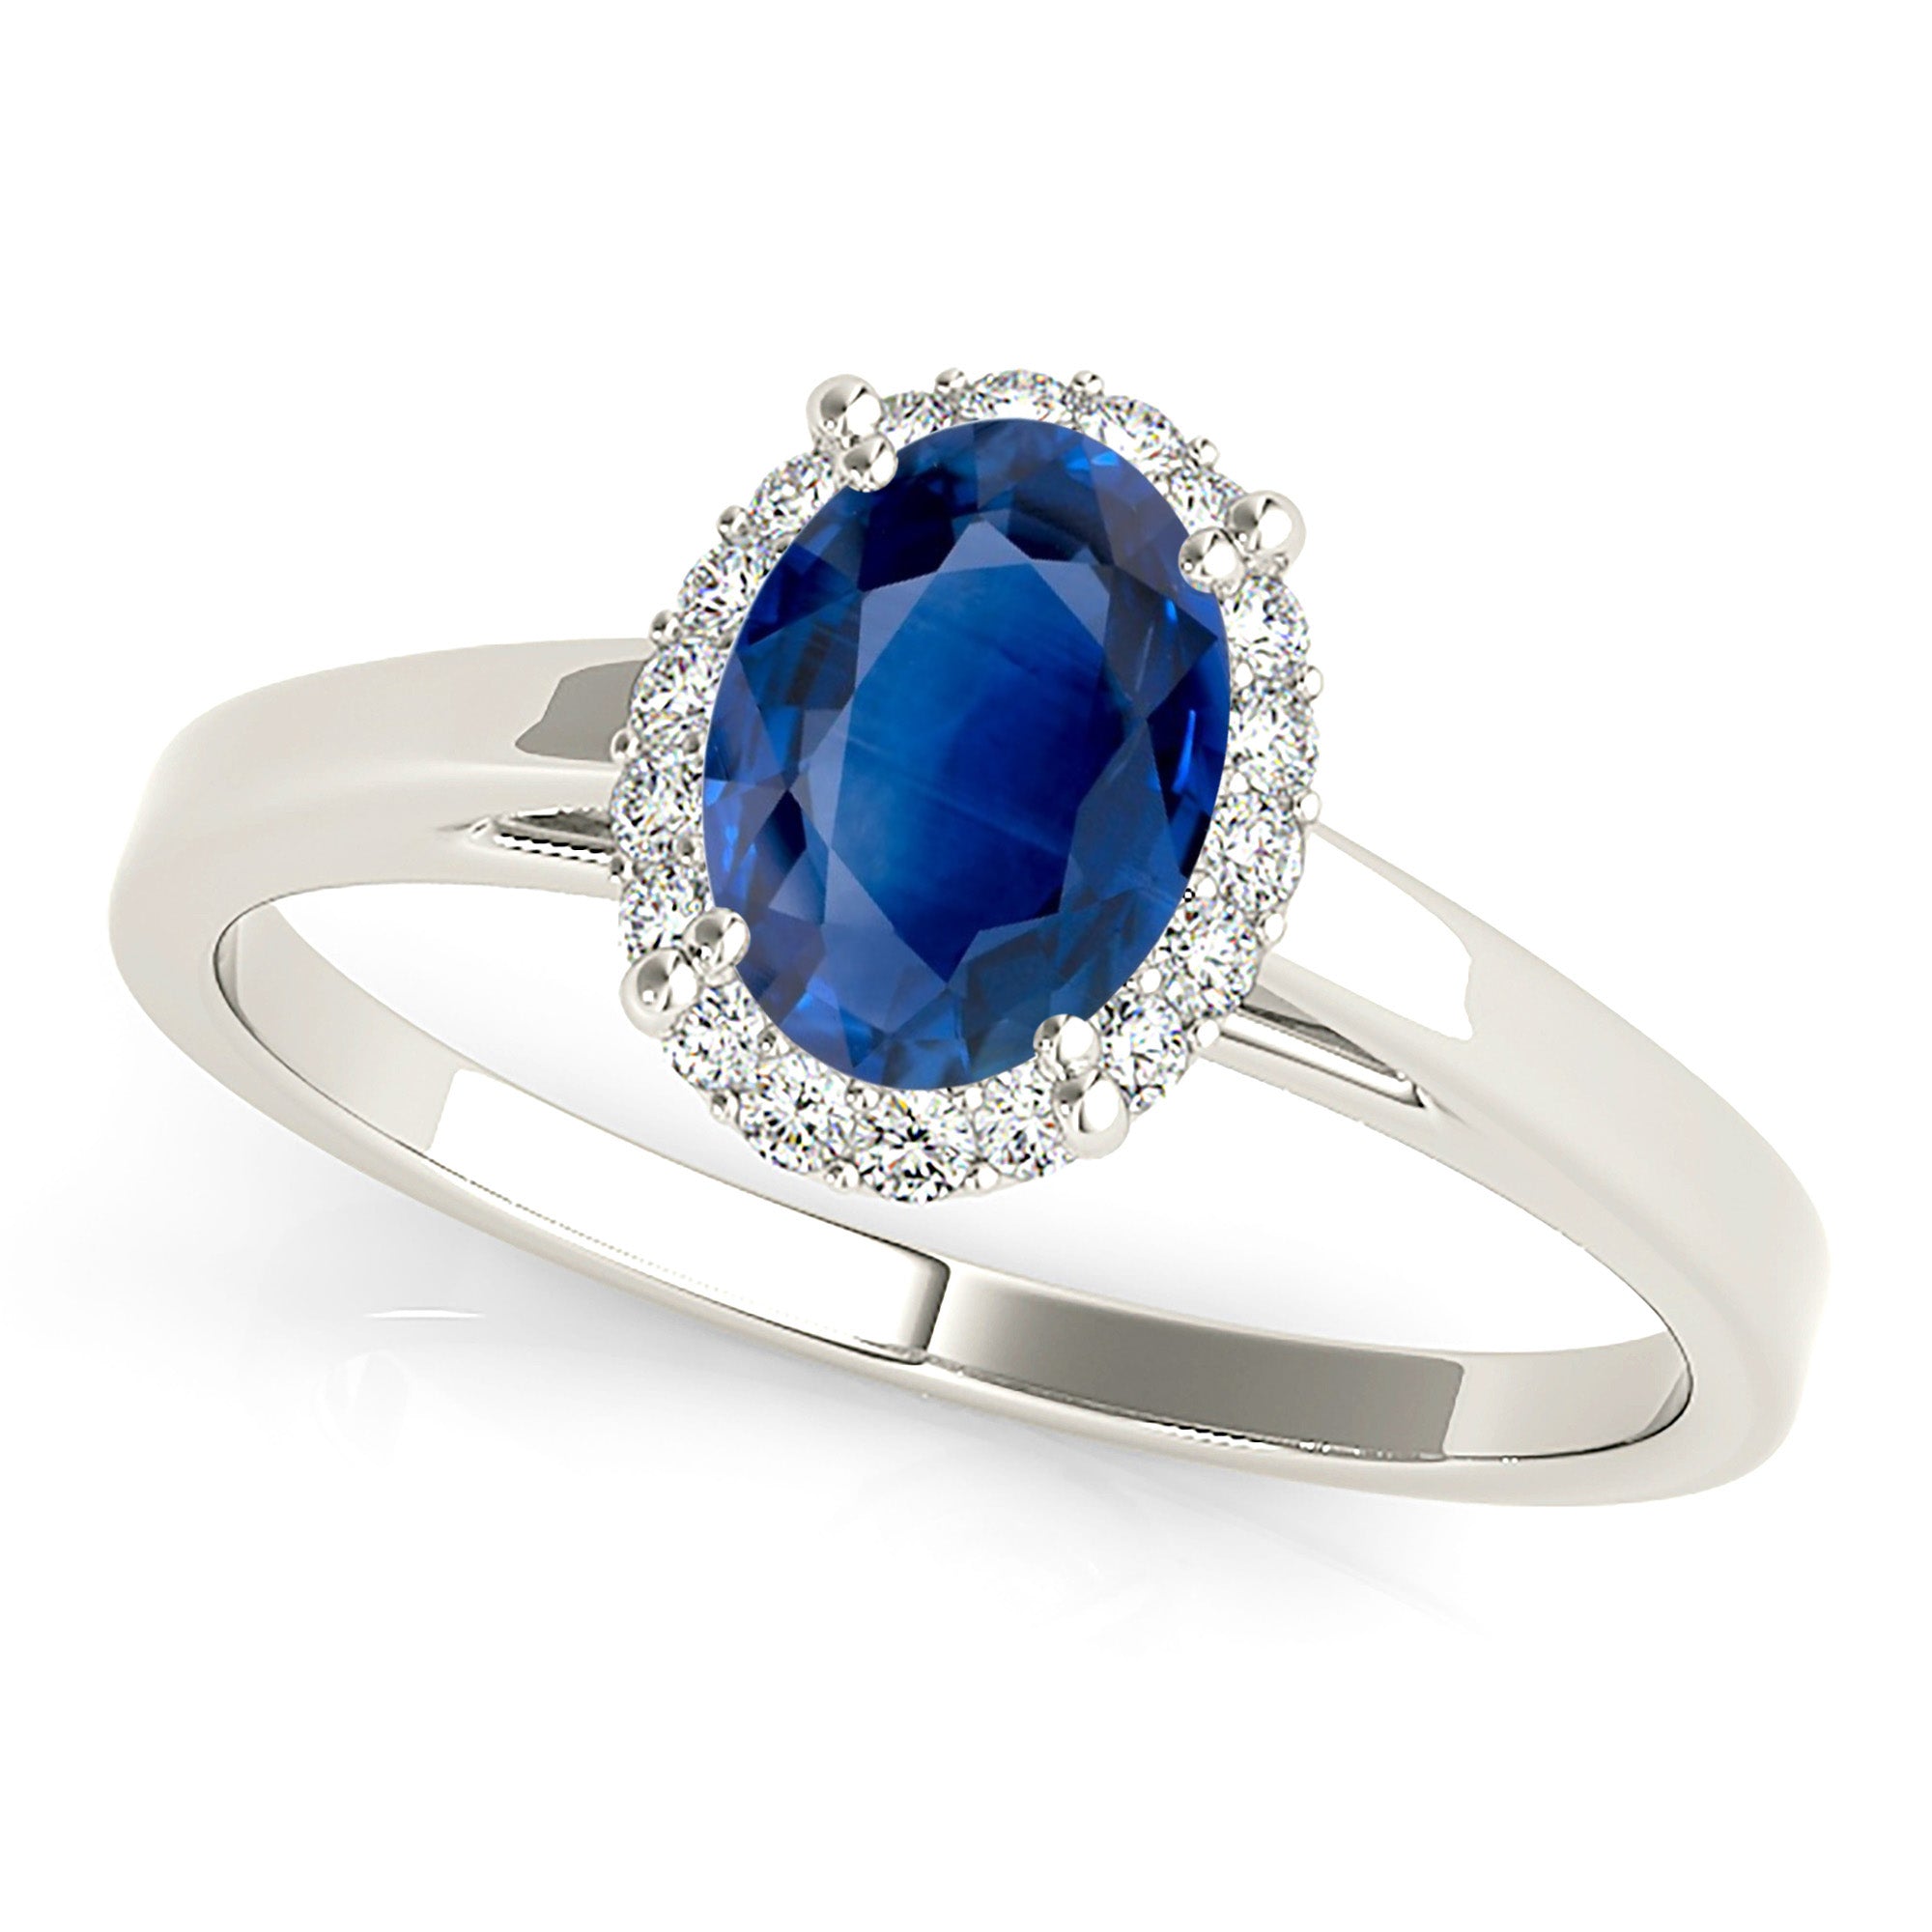 1.51 ct. Genuine Blue Oval Sapphire Ring With 0.20 ctw. Diamond Halo, Solid Gold Band | Natural Sapphire And Diamond Gemstone Ring-in 14K/18K White, Yellow, Rose Gold and Platinum - Christmas Jewelry Gift -VIRABYANI